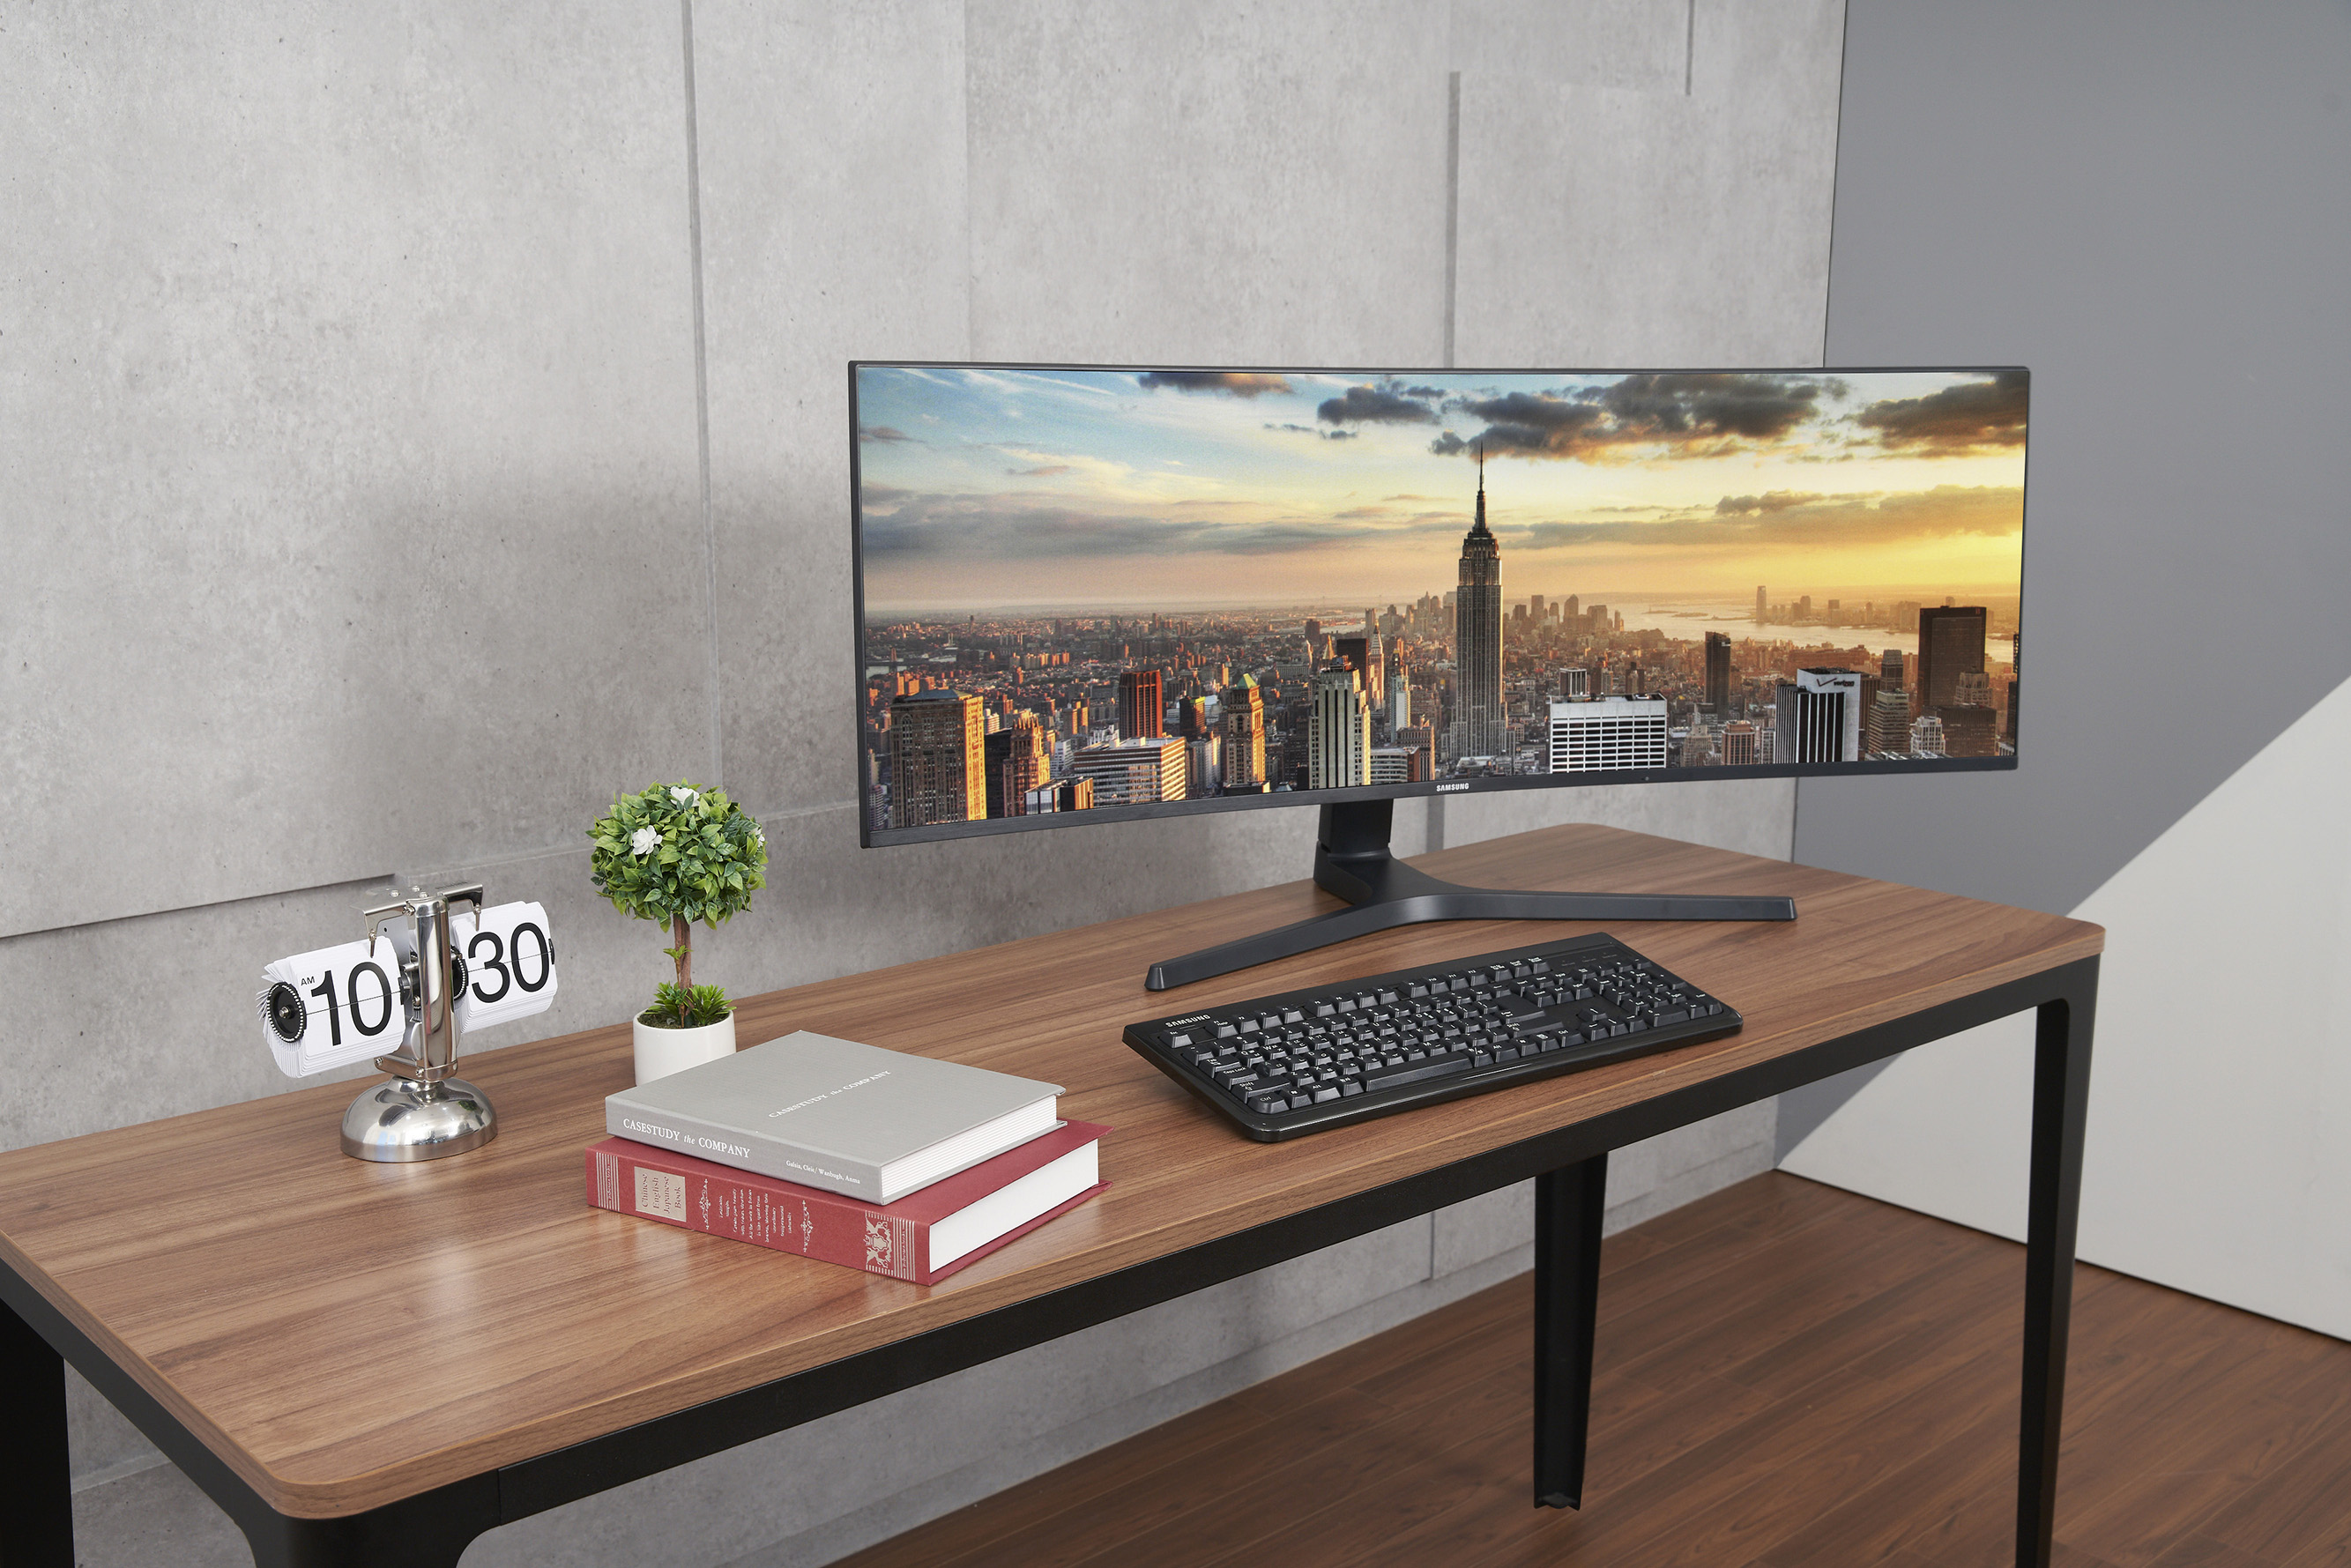 Samsung has unveiled a new monitor with a ultrawide curved display BGR